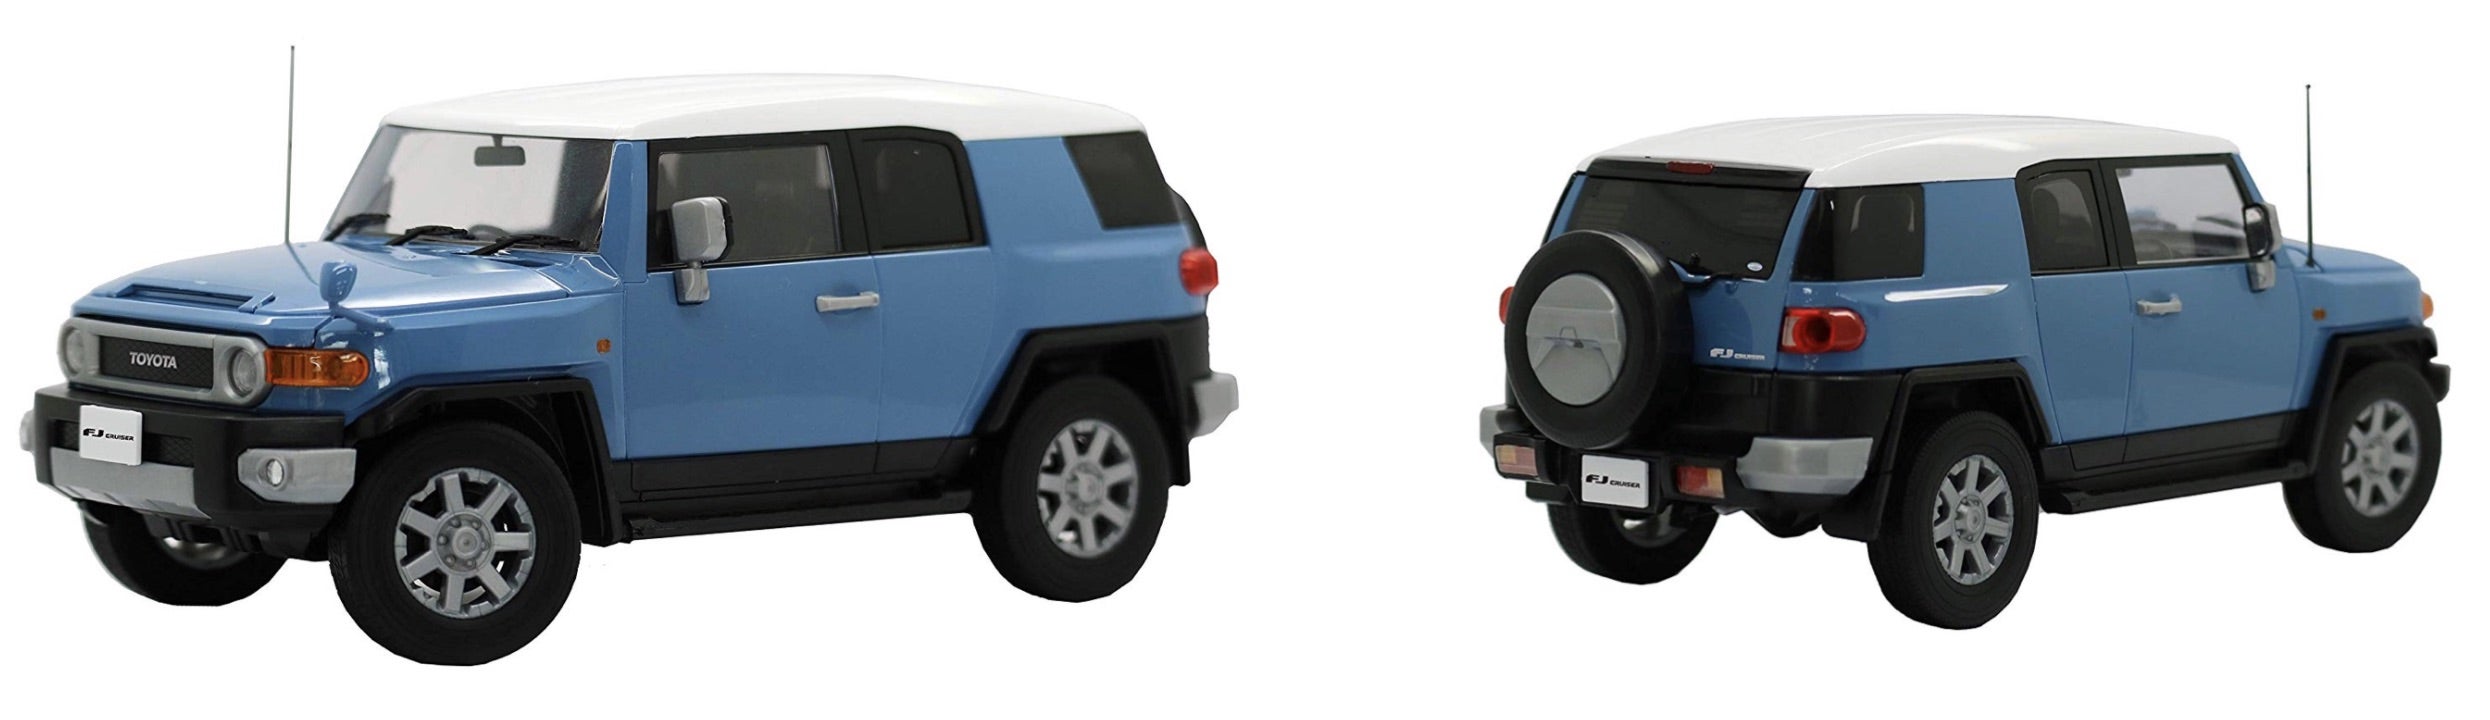 New Products Shipped Today Fj Cruiser Smokey Blue And Beige